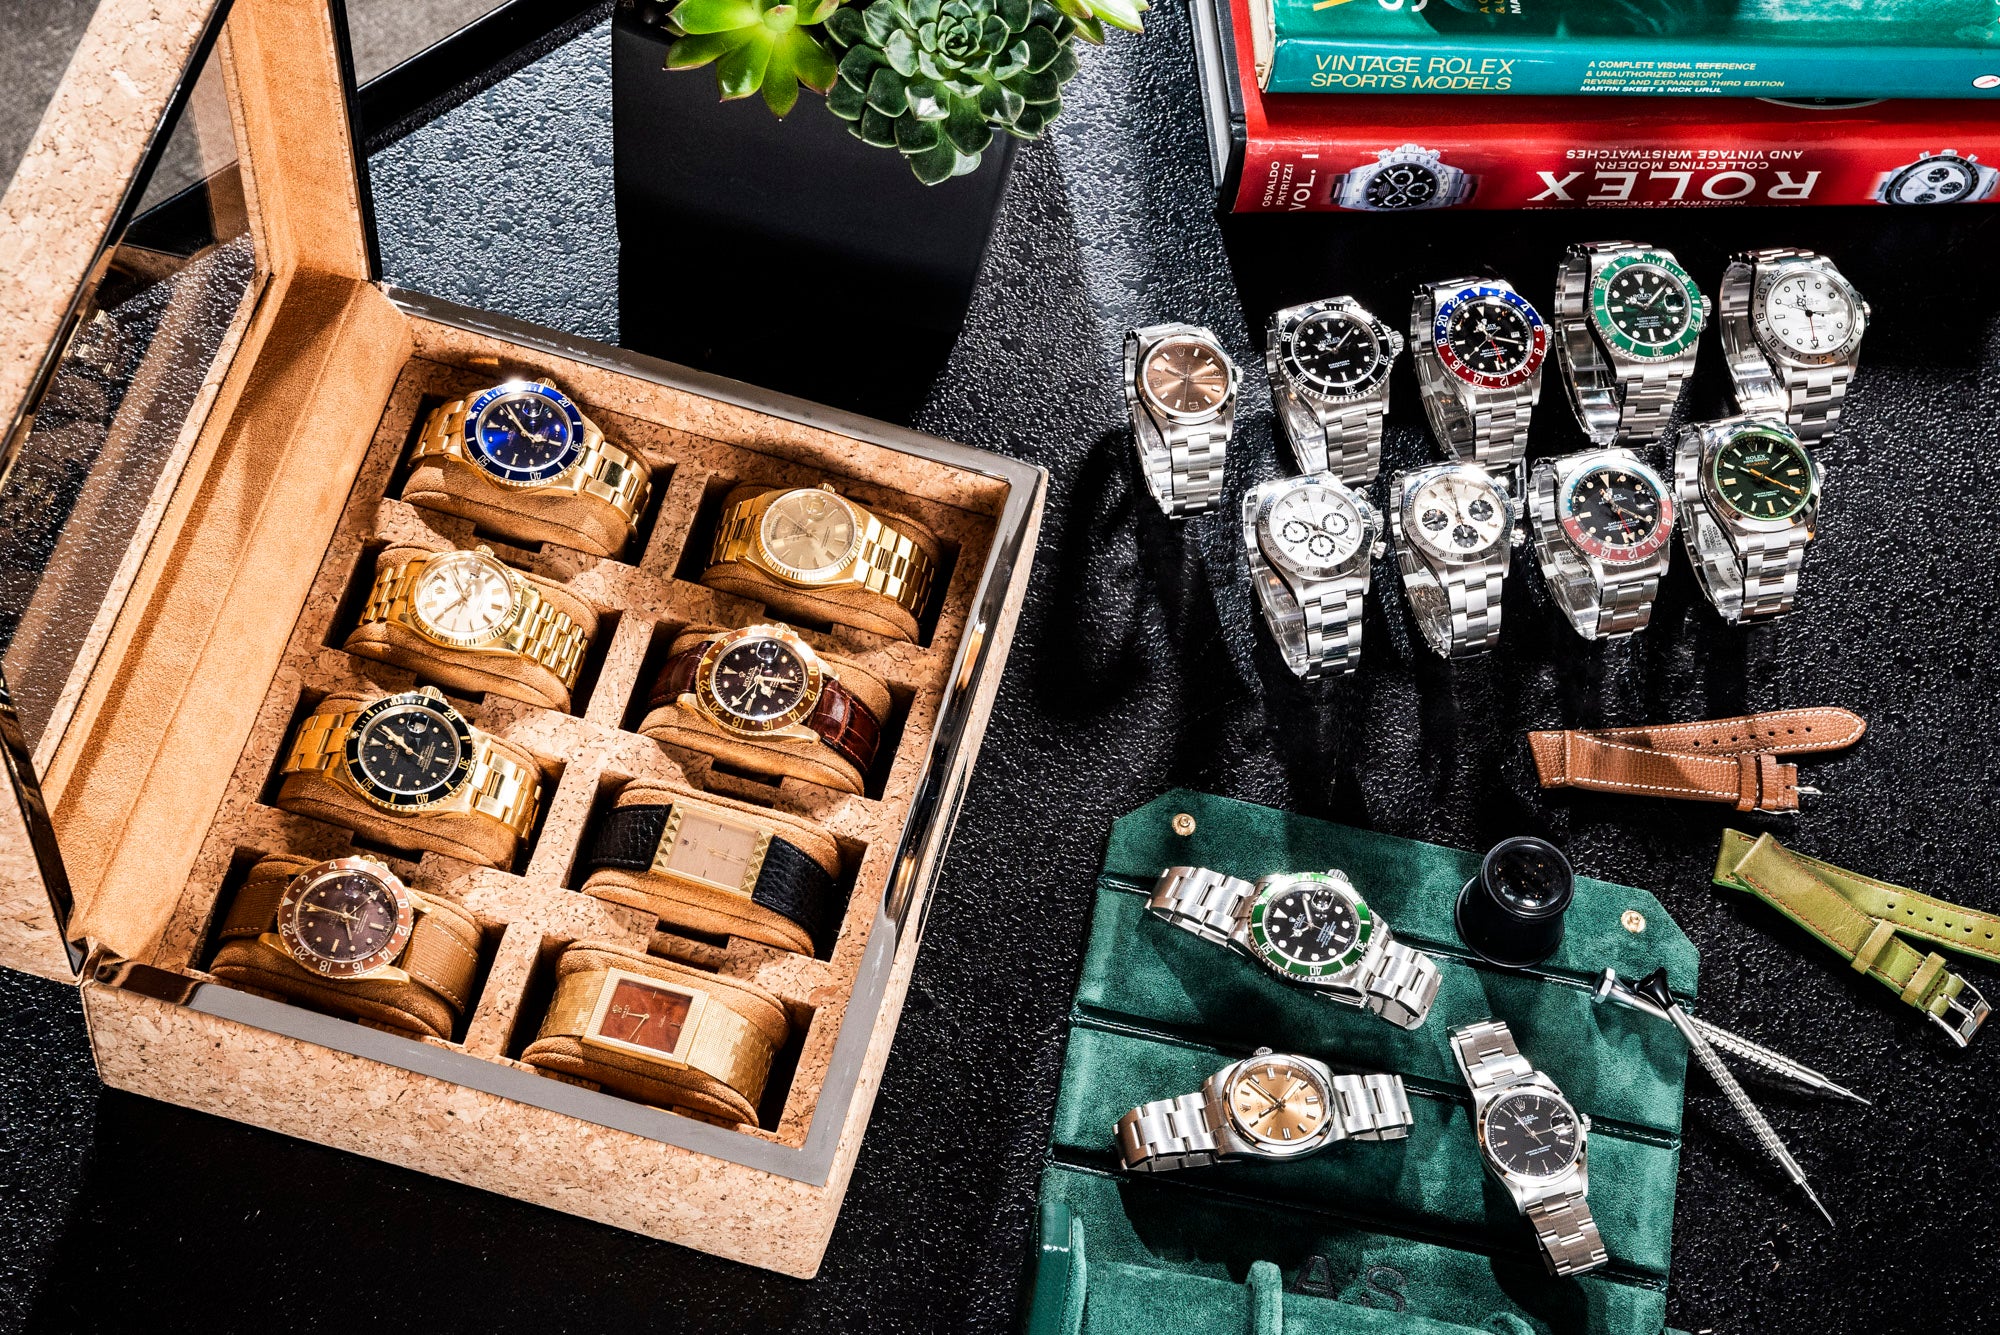 How To Buy A Vintage Or Pre-Owned Rolex – Analog:Shift